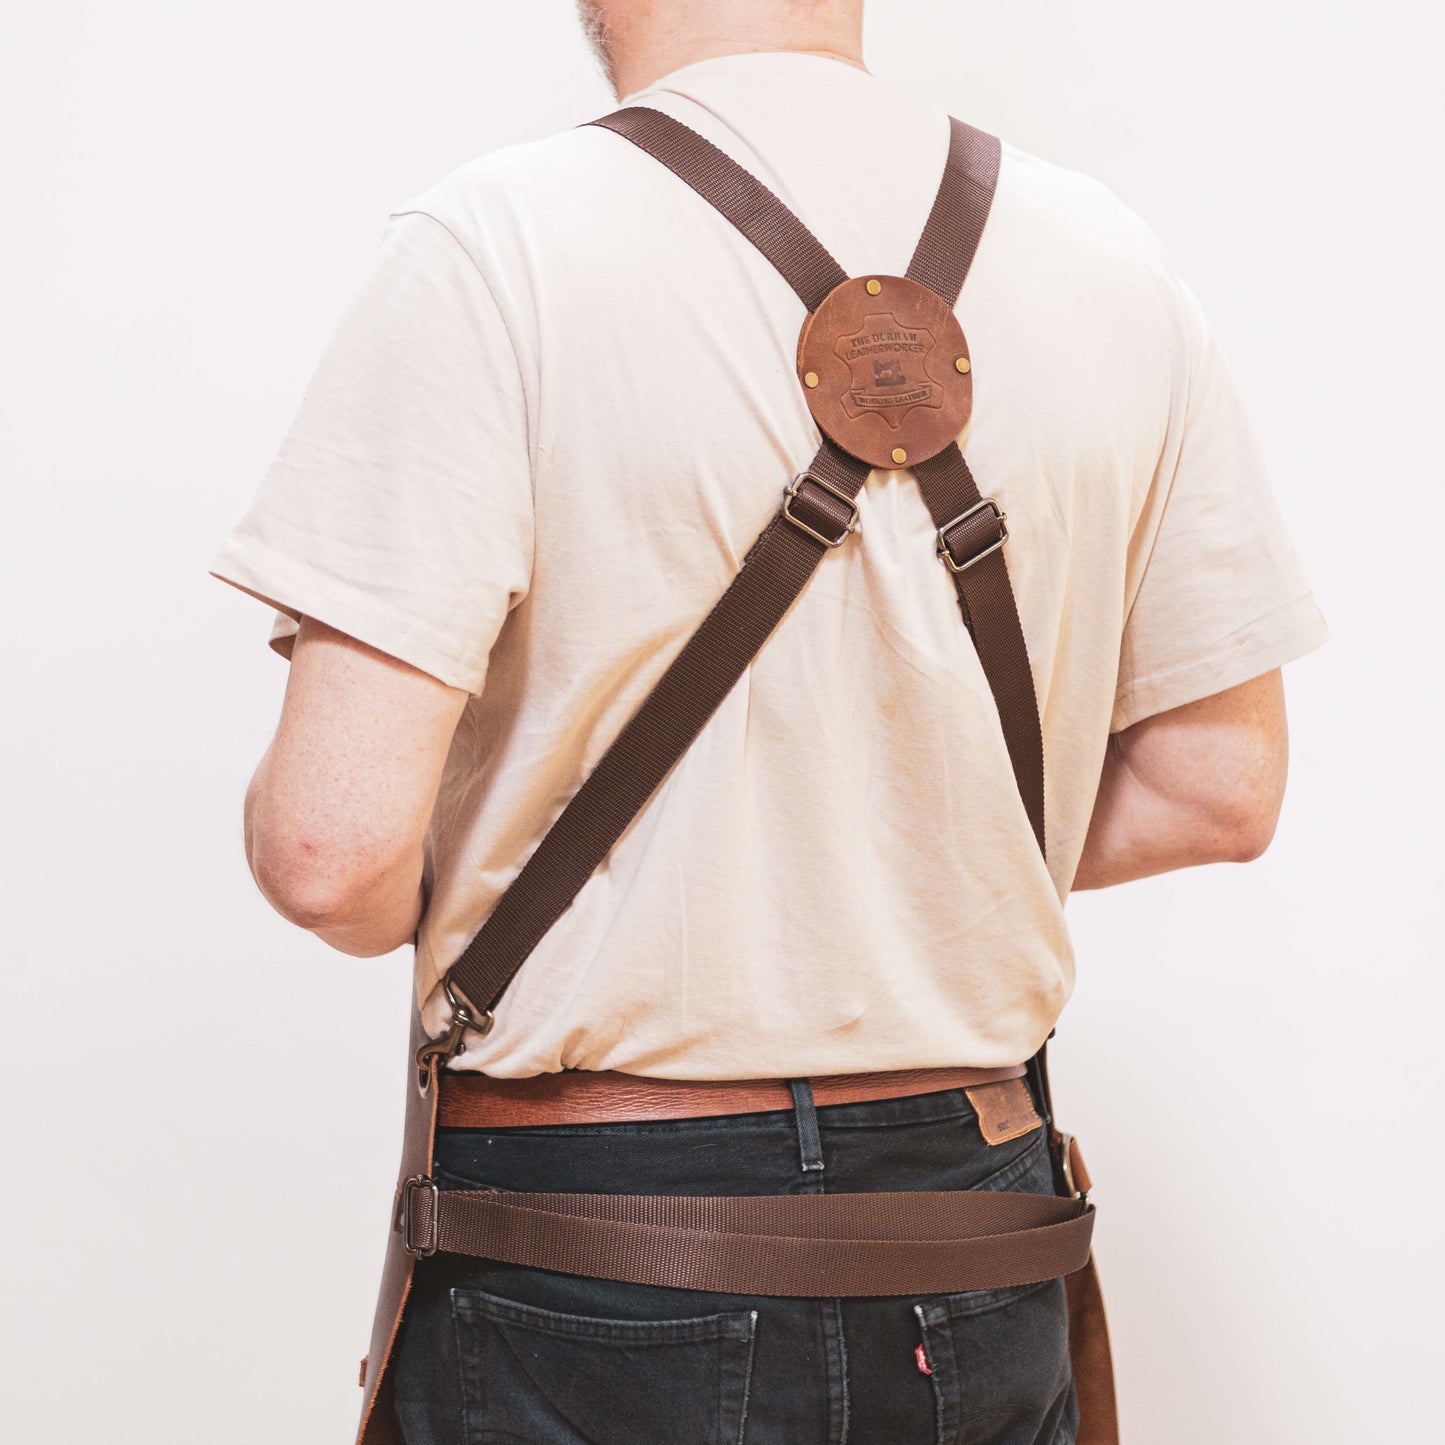 Rear view of a carpenter wearing a beige t-shirt, dark brown leather suspender toolbelt from The Durham Leatherworker, and a belt, featuring a brass round centerpiece on the suspenders against a light background.